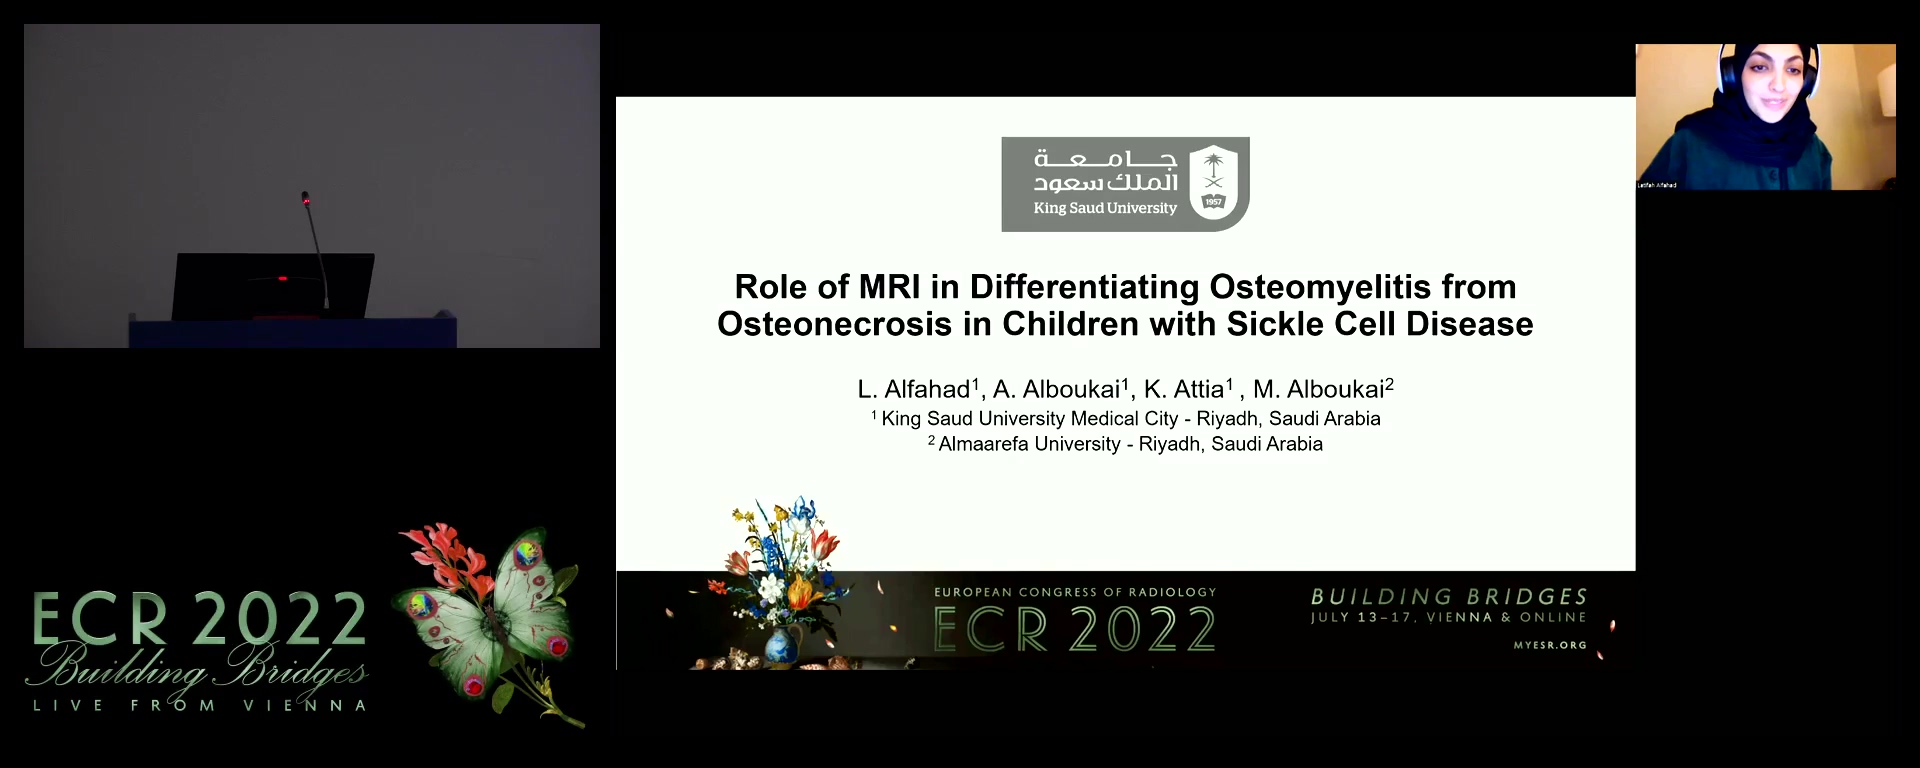 Role of MRI in differentiating osteomyelitis from osteonecrosis in children with sickle cell disease: a cross-sectional study from a tertiary care hospital in Riyadh, Saudi Arabia - Latifah Alfahad, Riyadh / SA